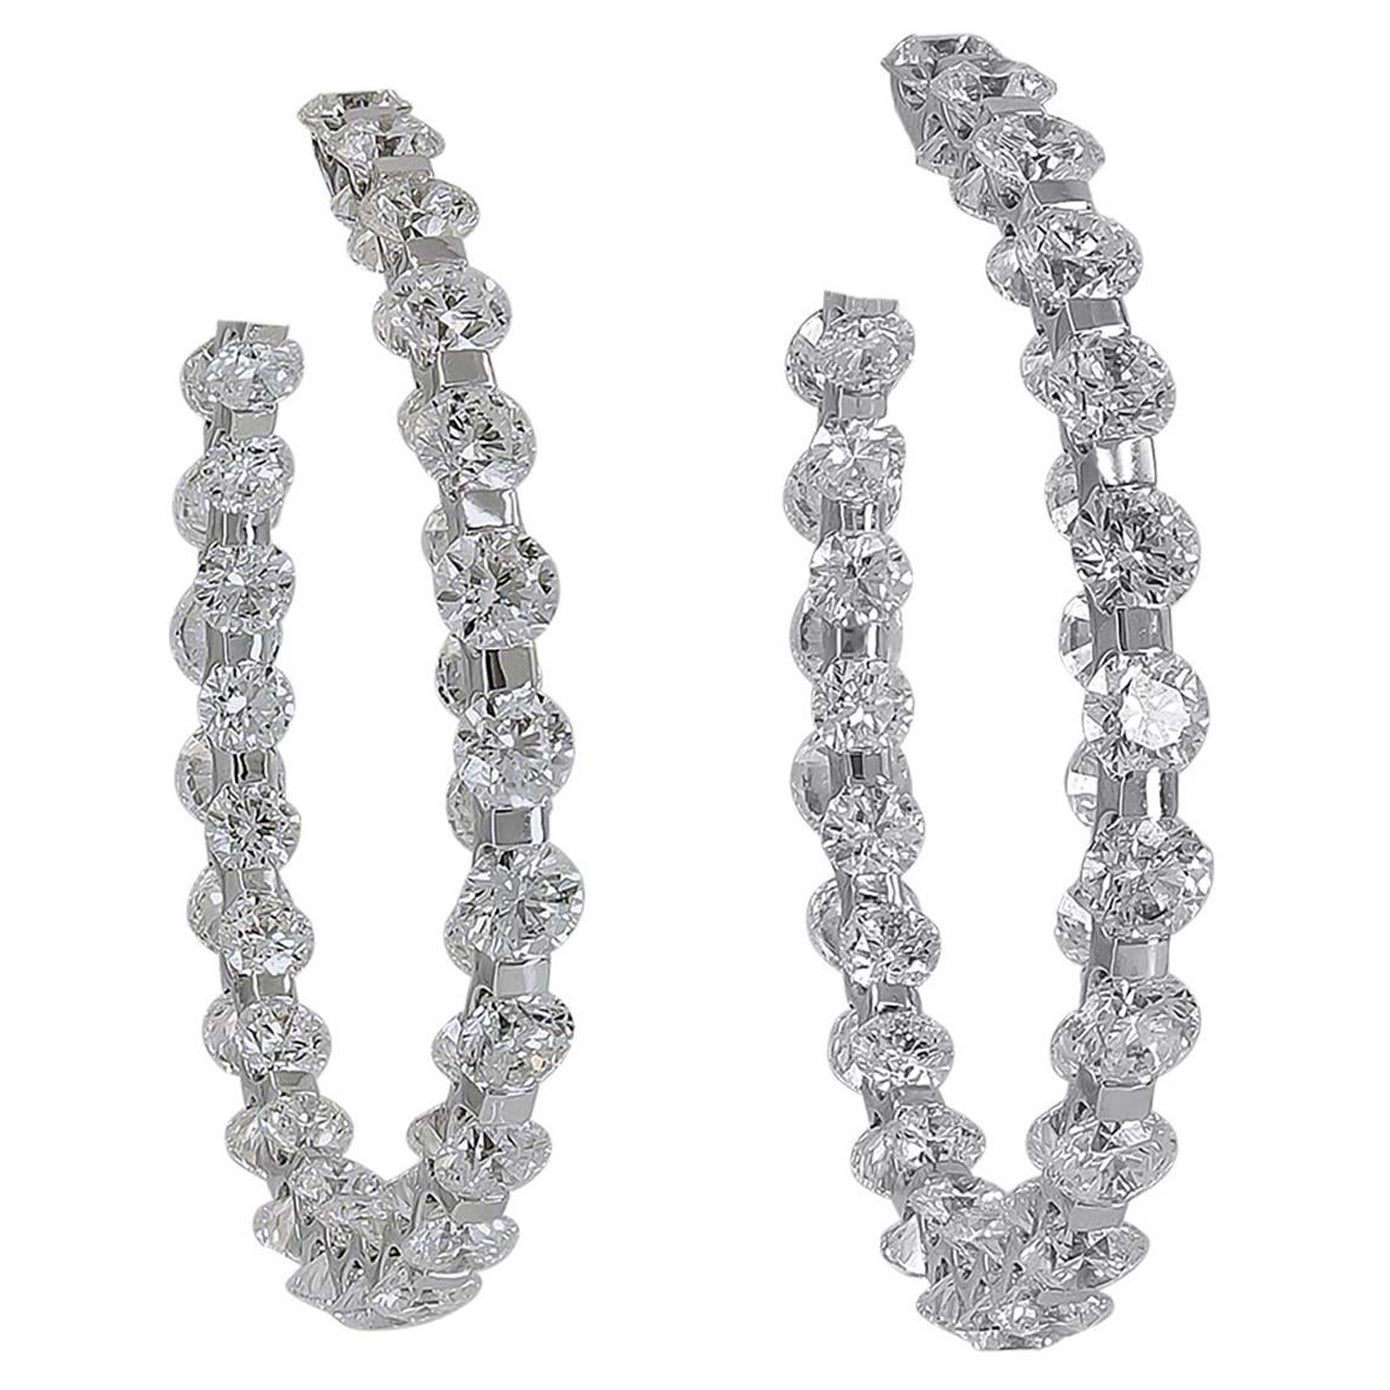 Diamond, Pearl and Antique Hoop Earrings - 5,973 For Sale at 